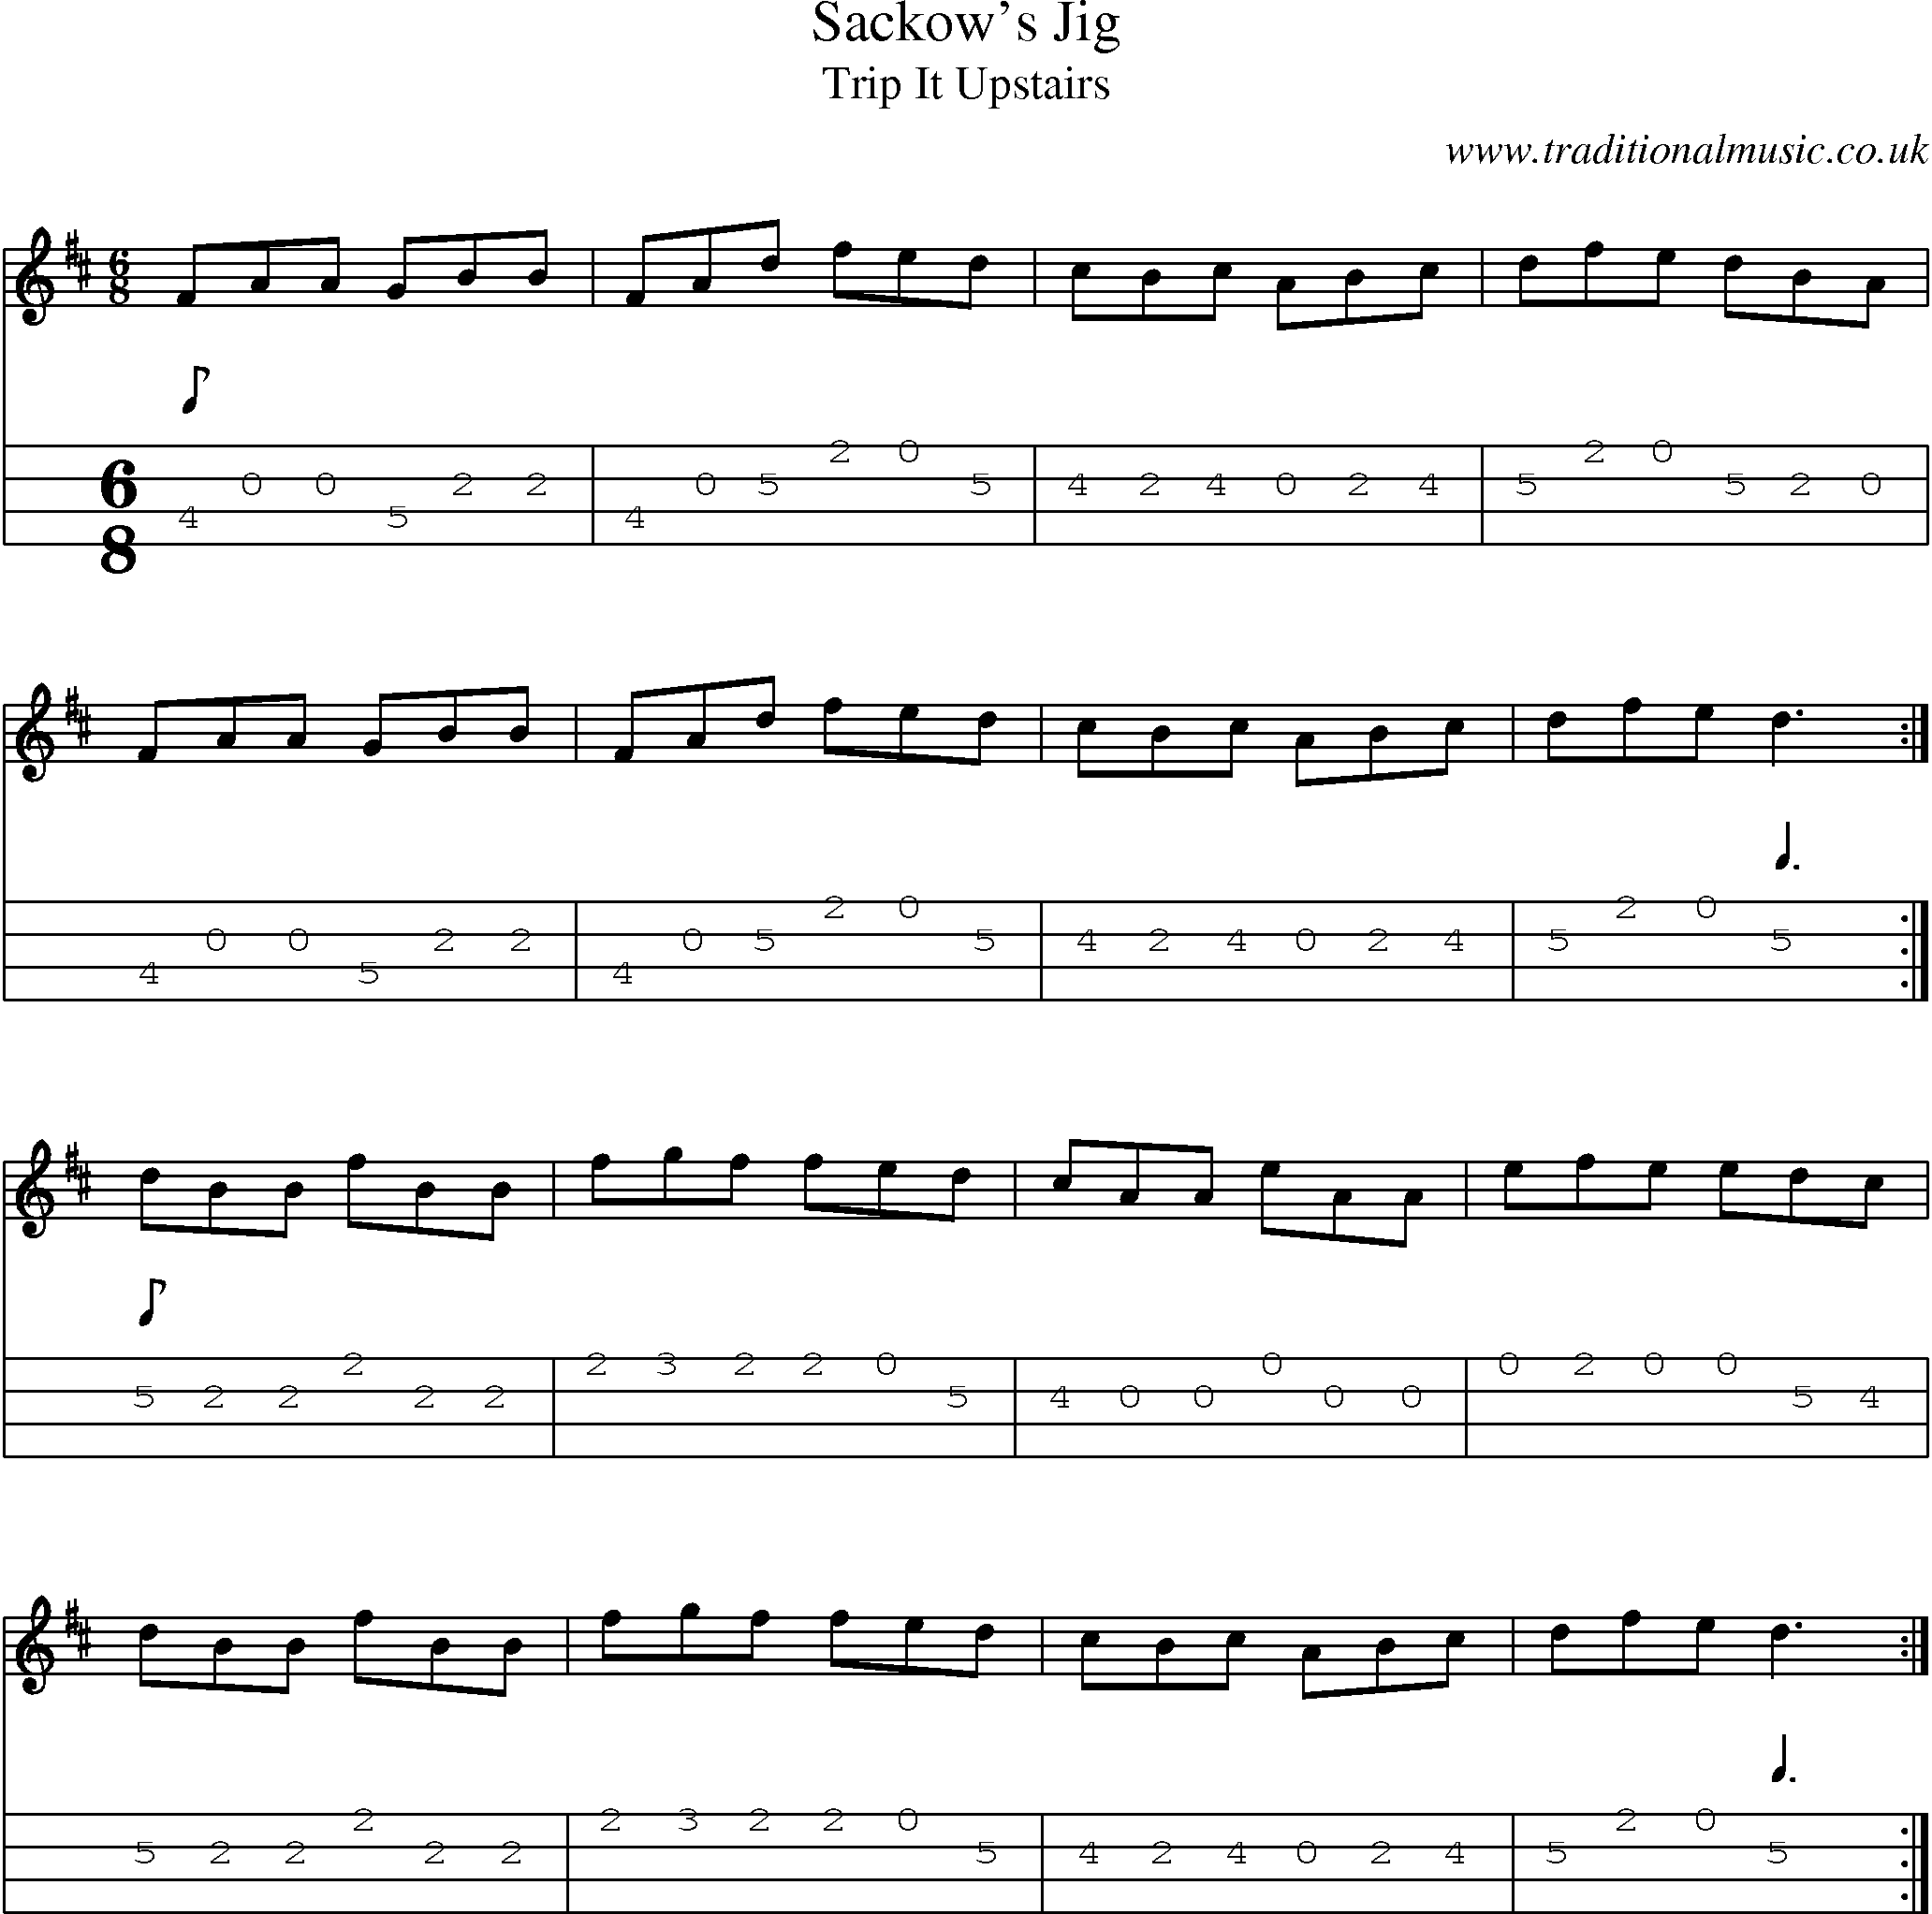 Music Score and Mandolin Tabs for Sackows Jig